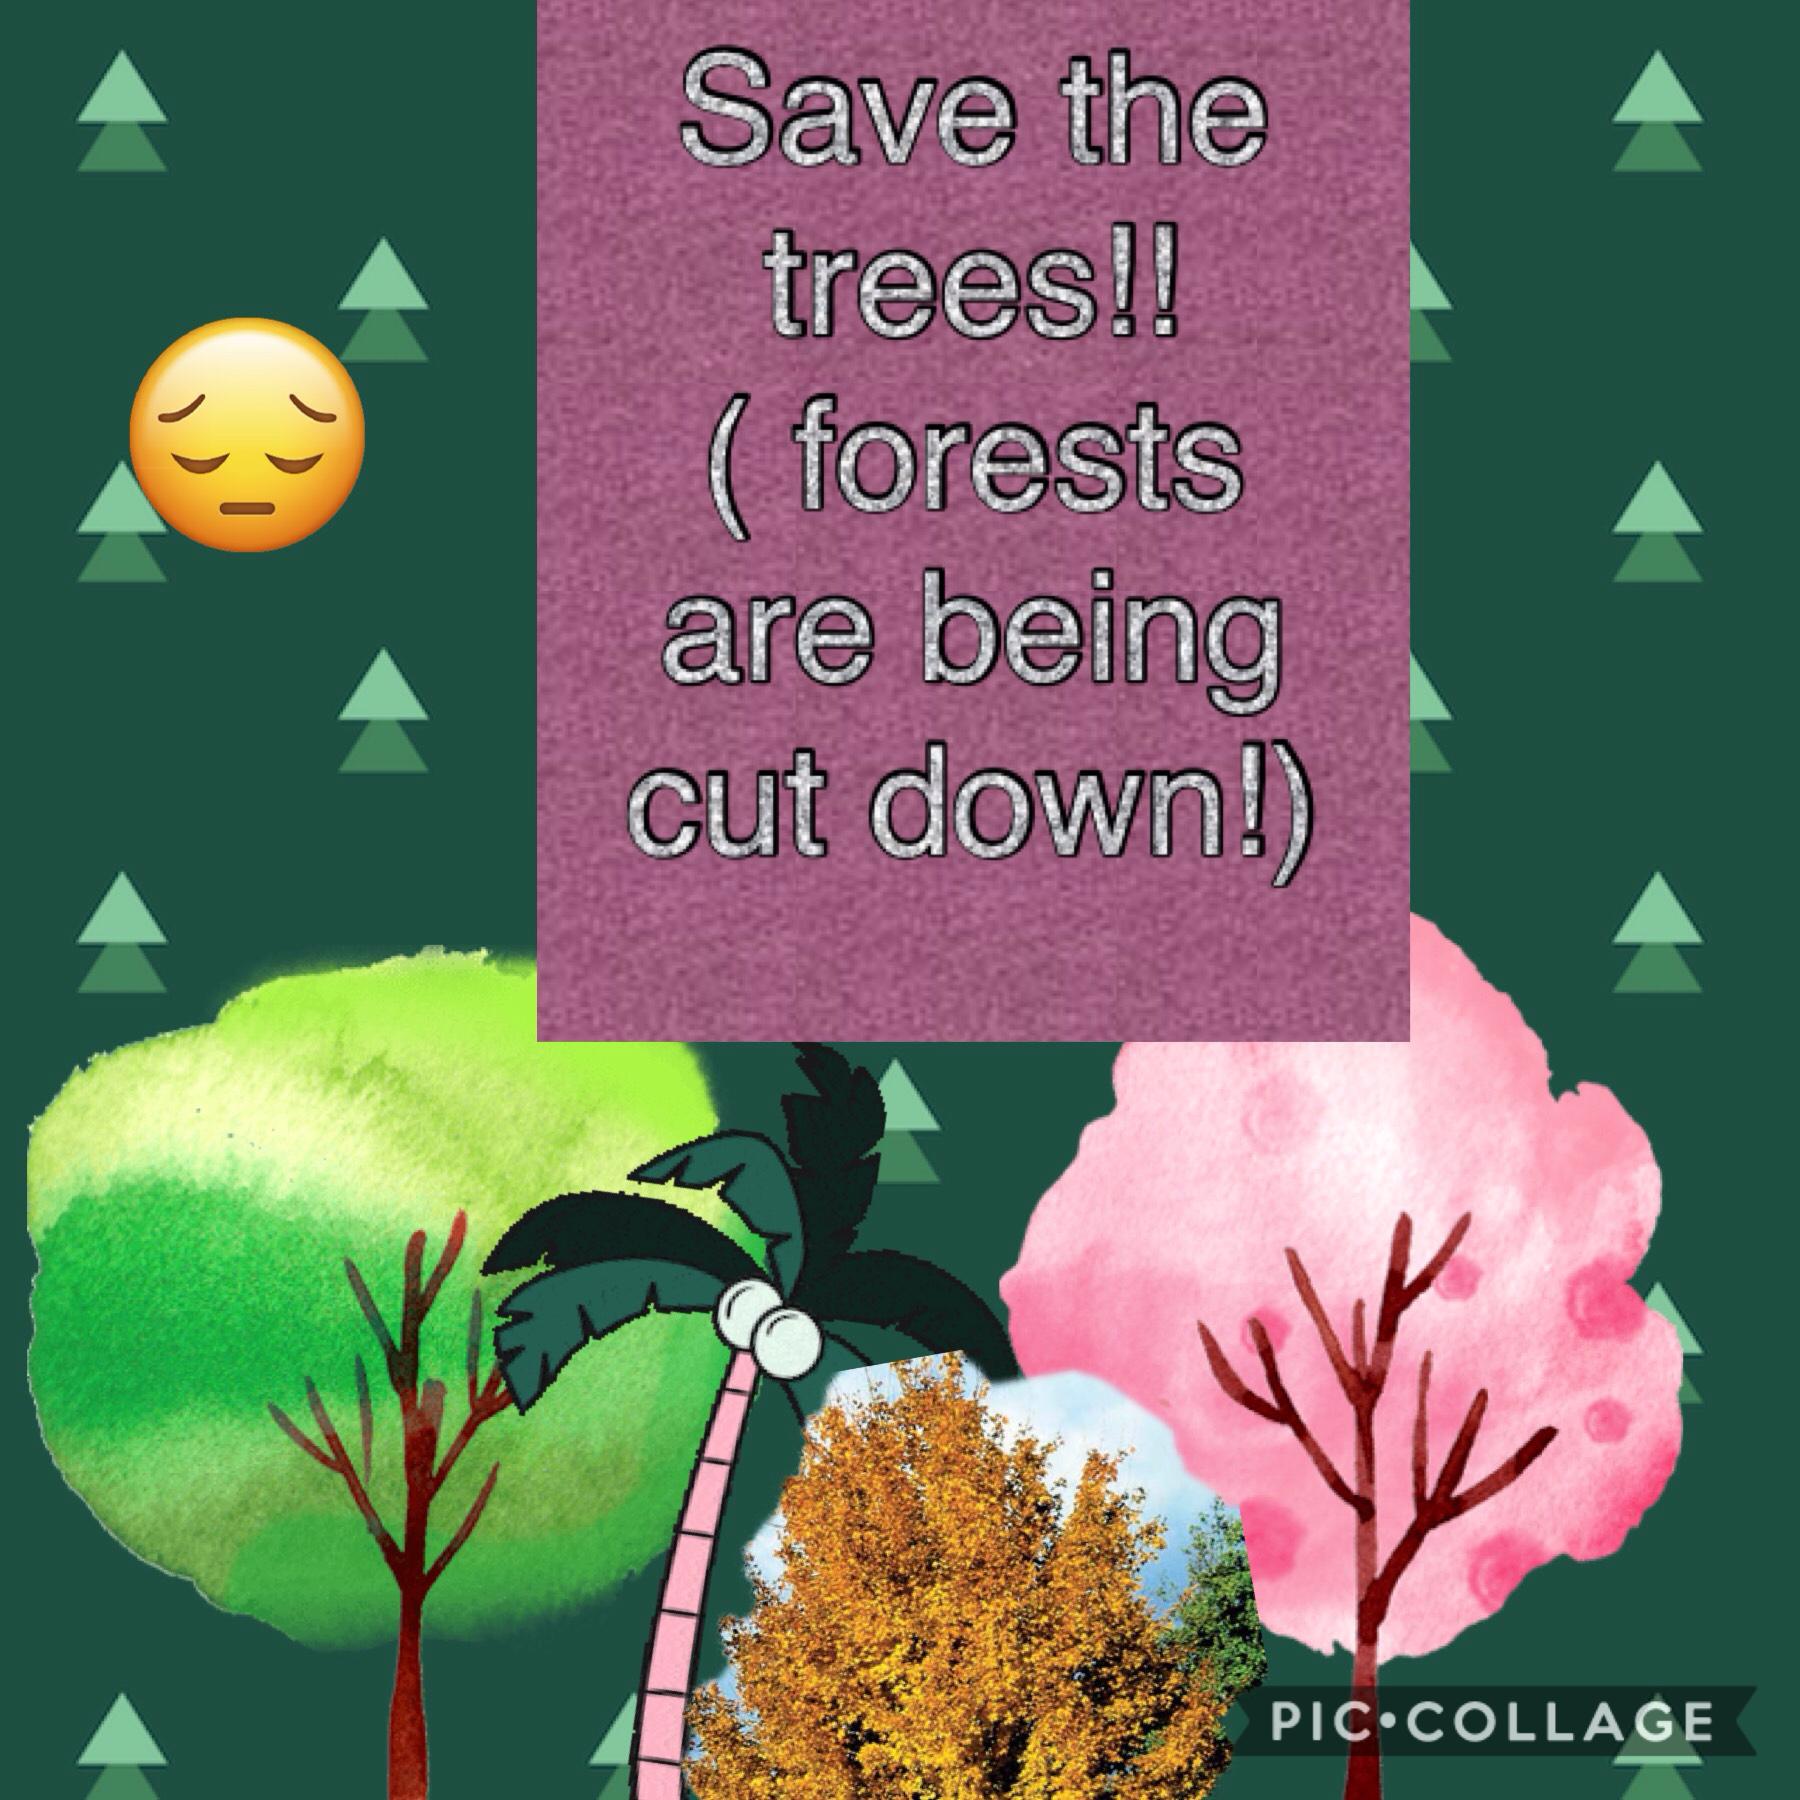 Please help the trees!!!! 😣